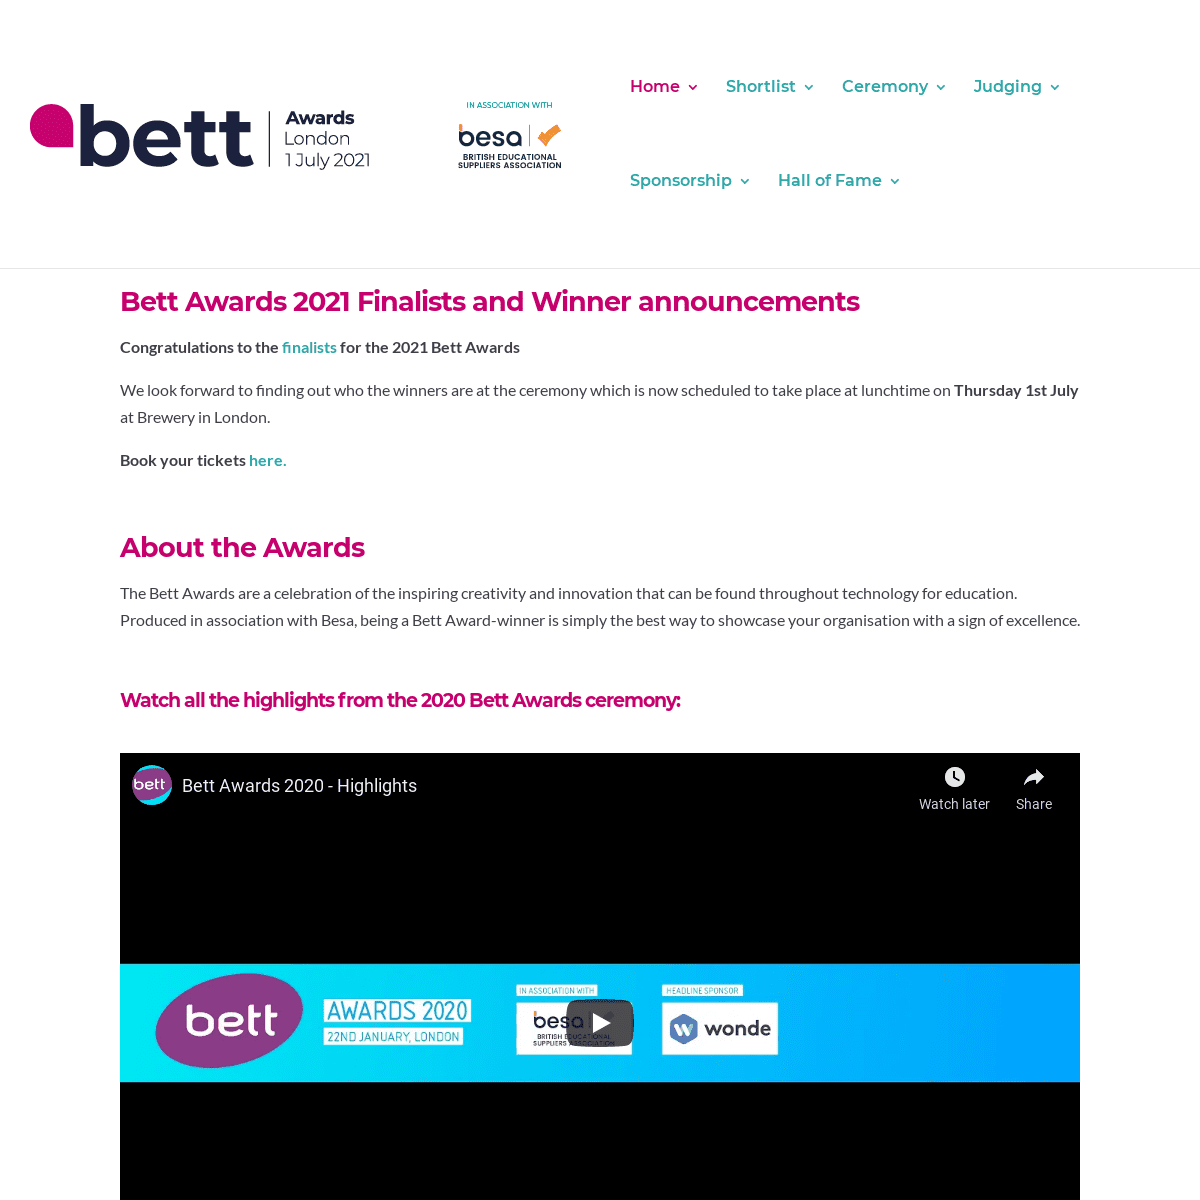 A complete backup of https://bettawards.com